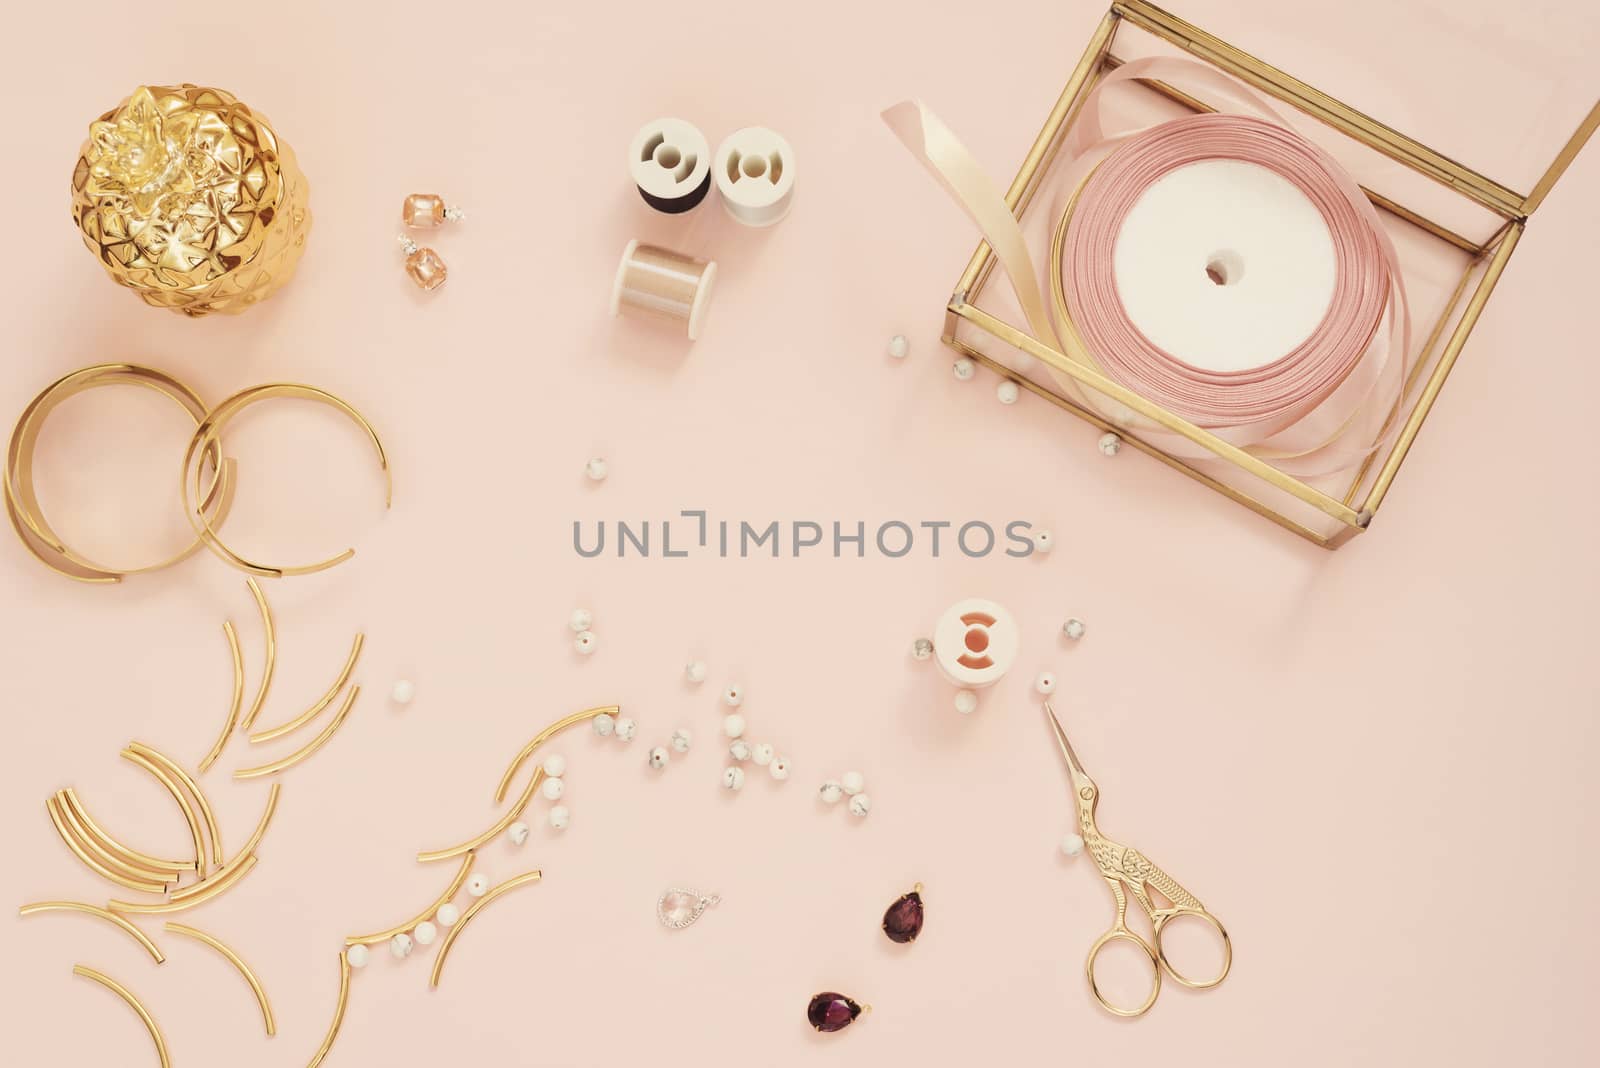 Jewelry designer workplace. Handmade, craft concept. Materials for making jewelry ? golden scissors, ribbons, gold tubes, bracelet settings. Freelance workspace in flat lay style.